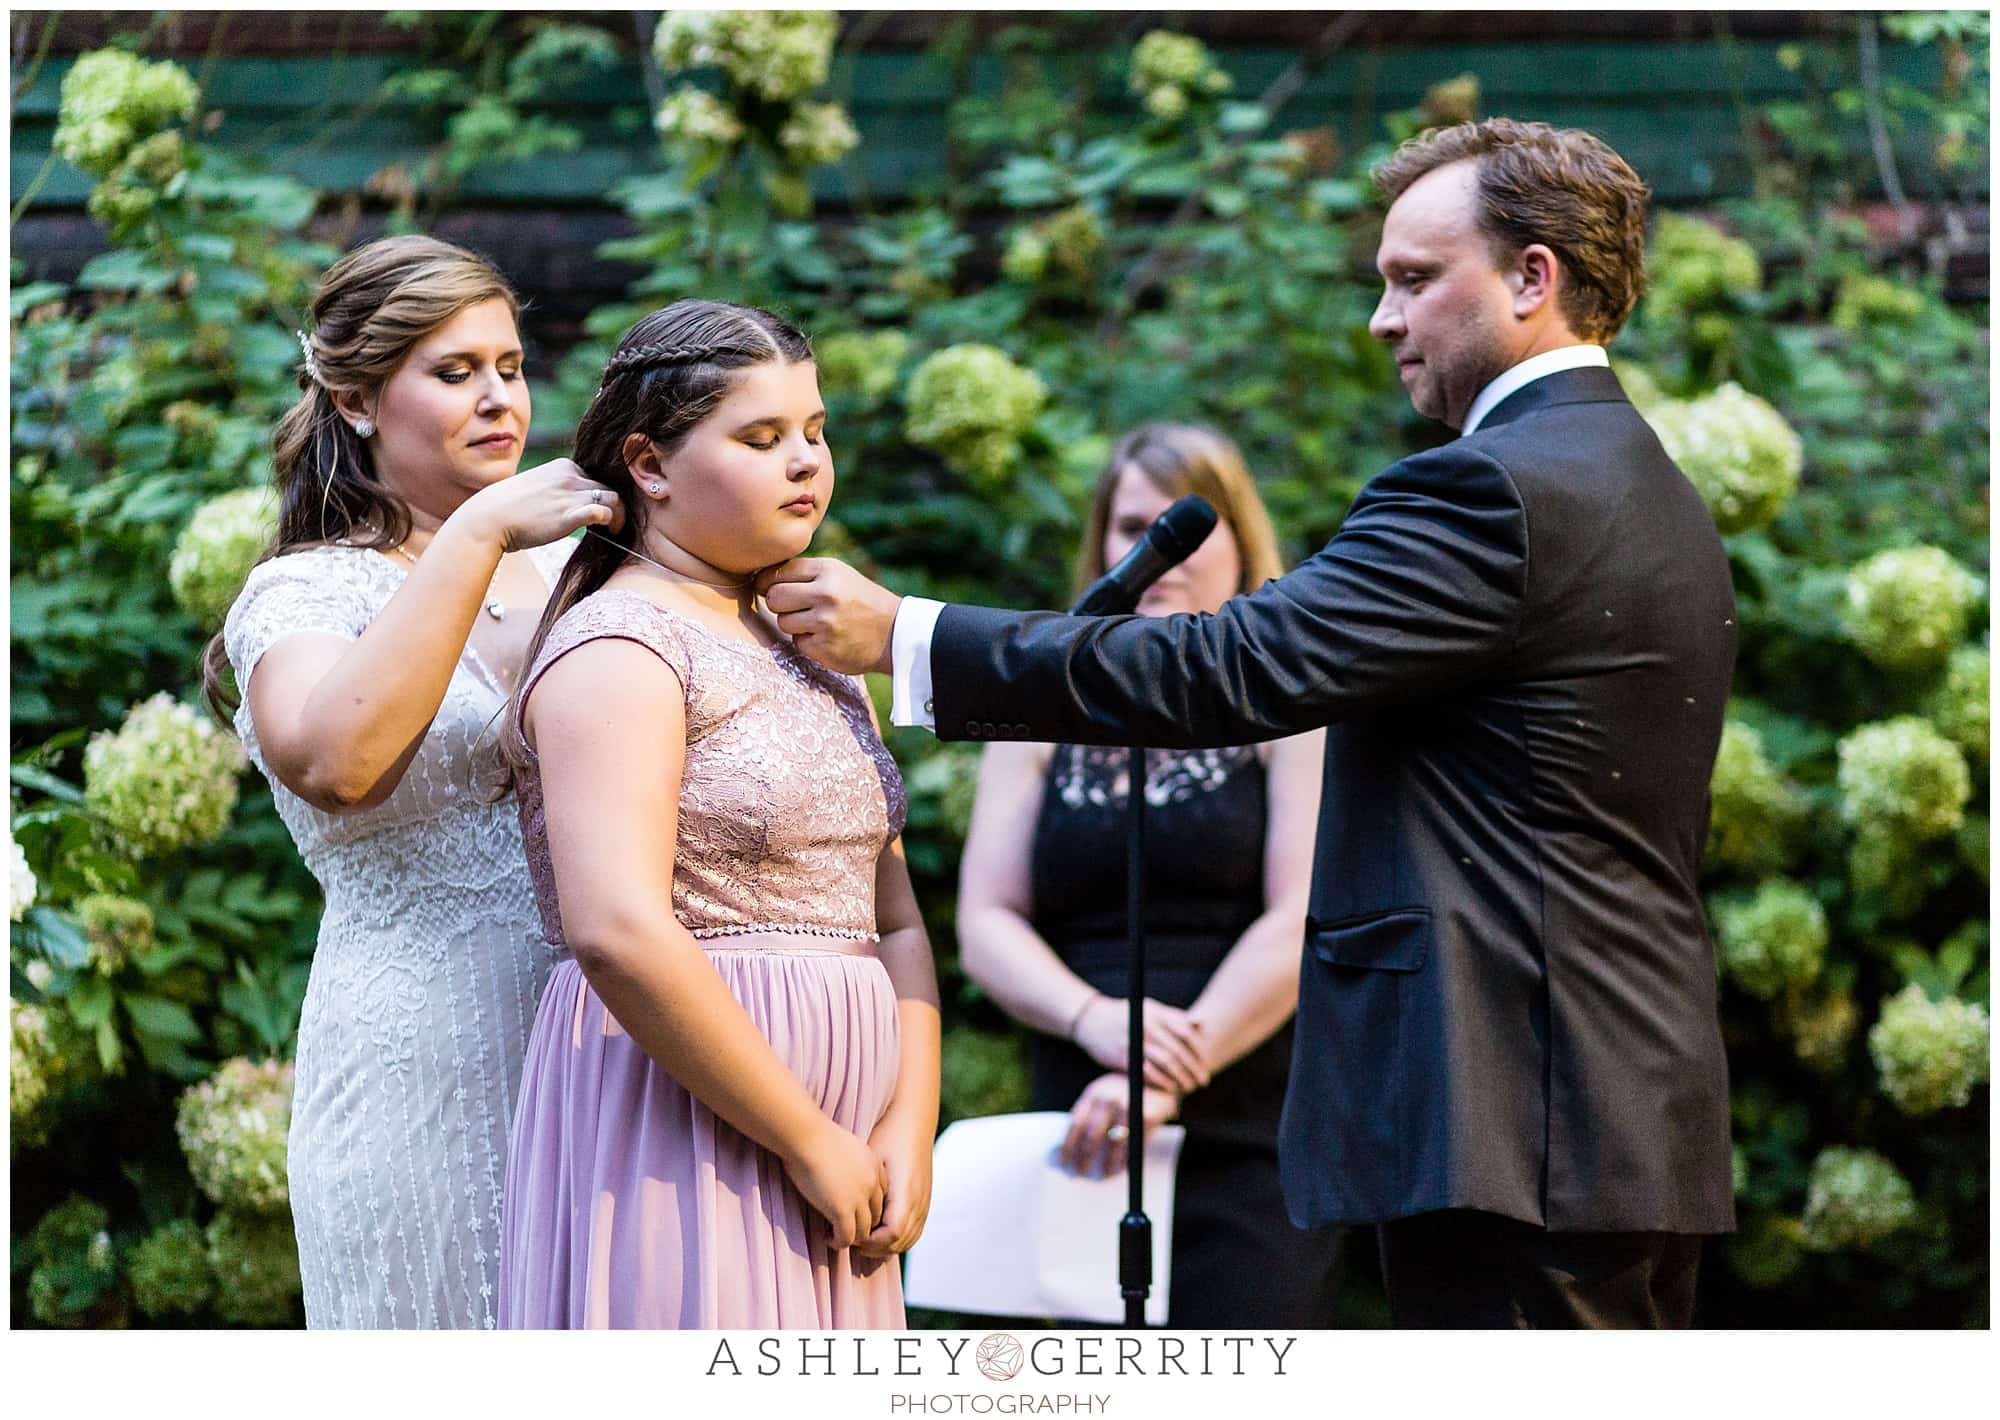 Groom gifts the bride's daughter a Tiffany necklace during their Colonial Dames wedding ceremony as he made vows to her, as well.